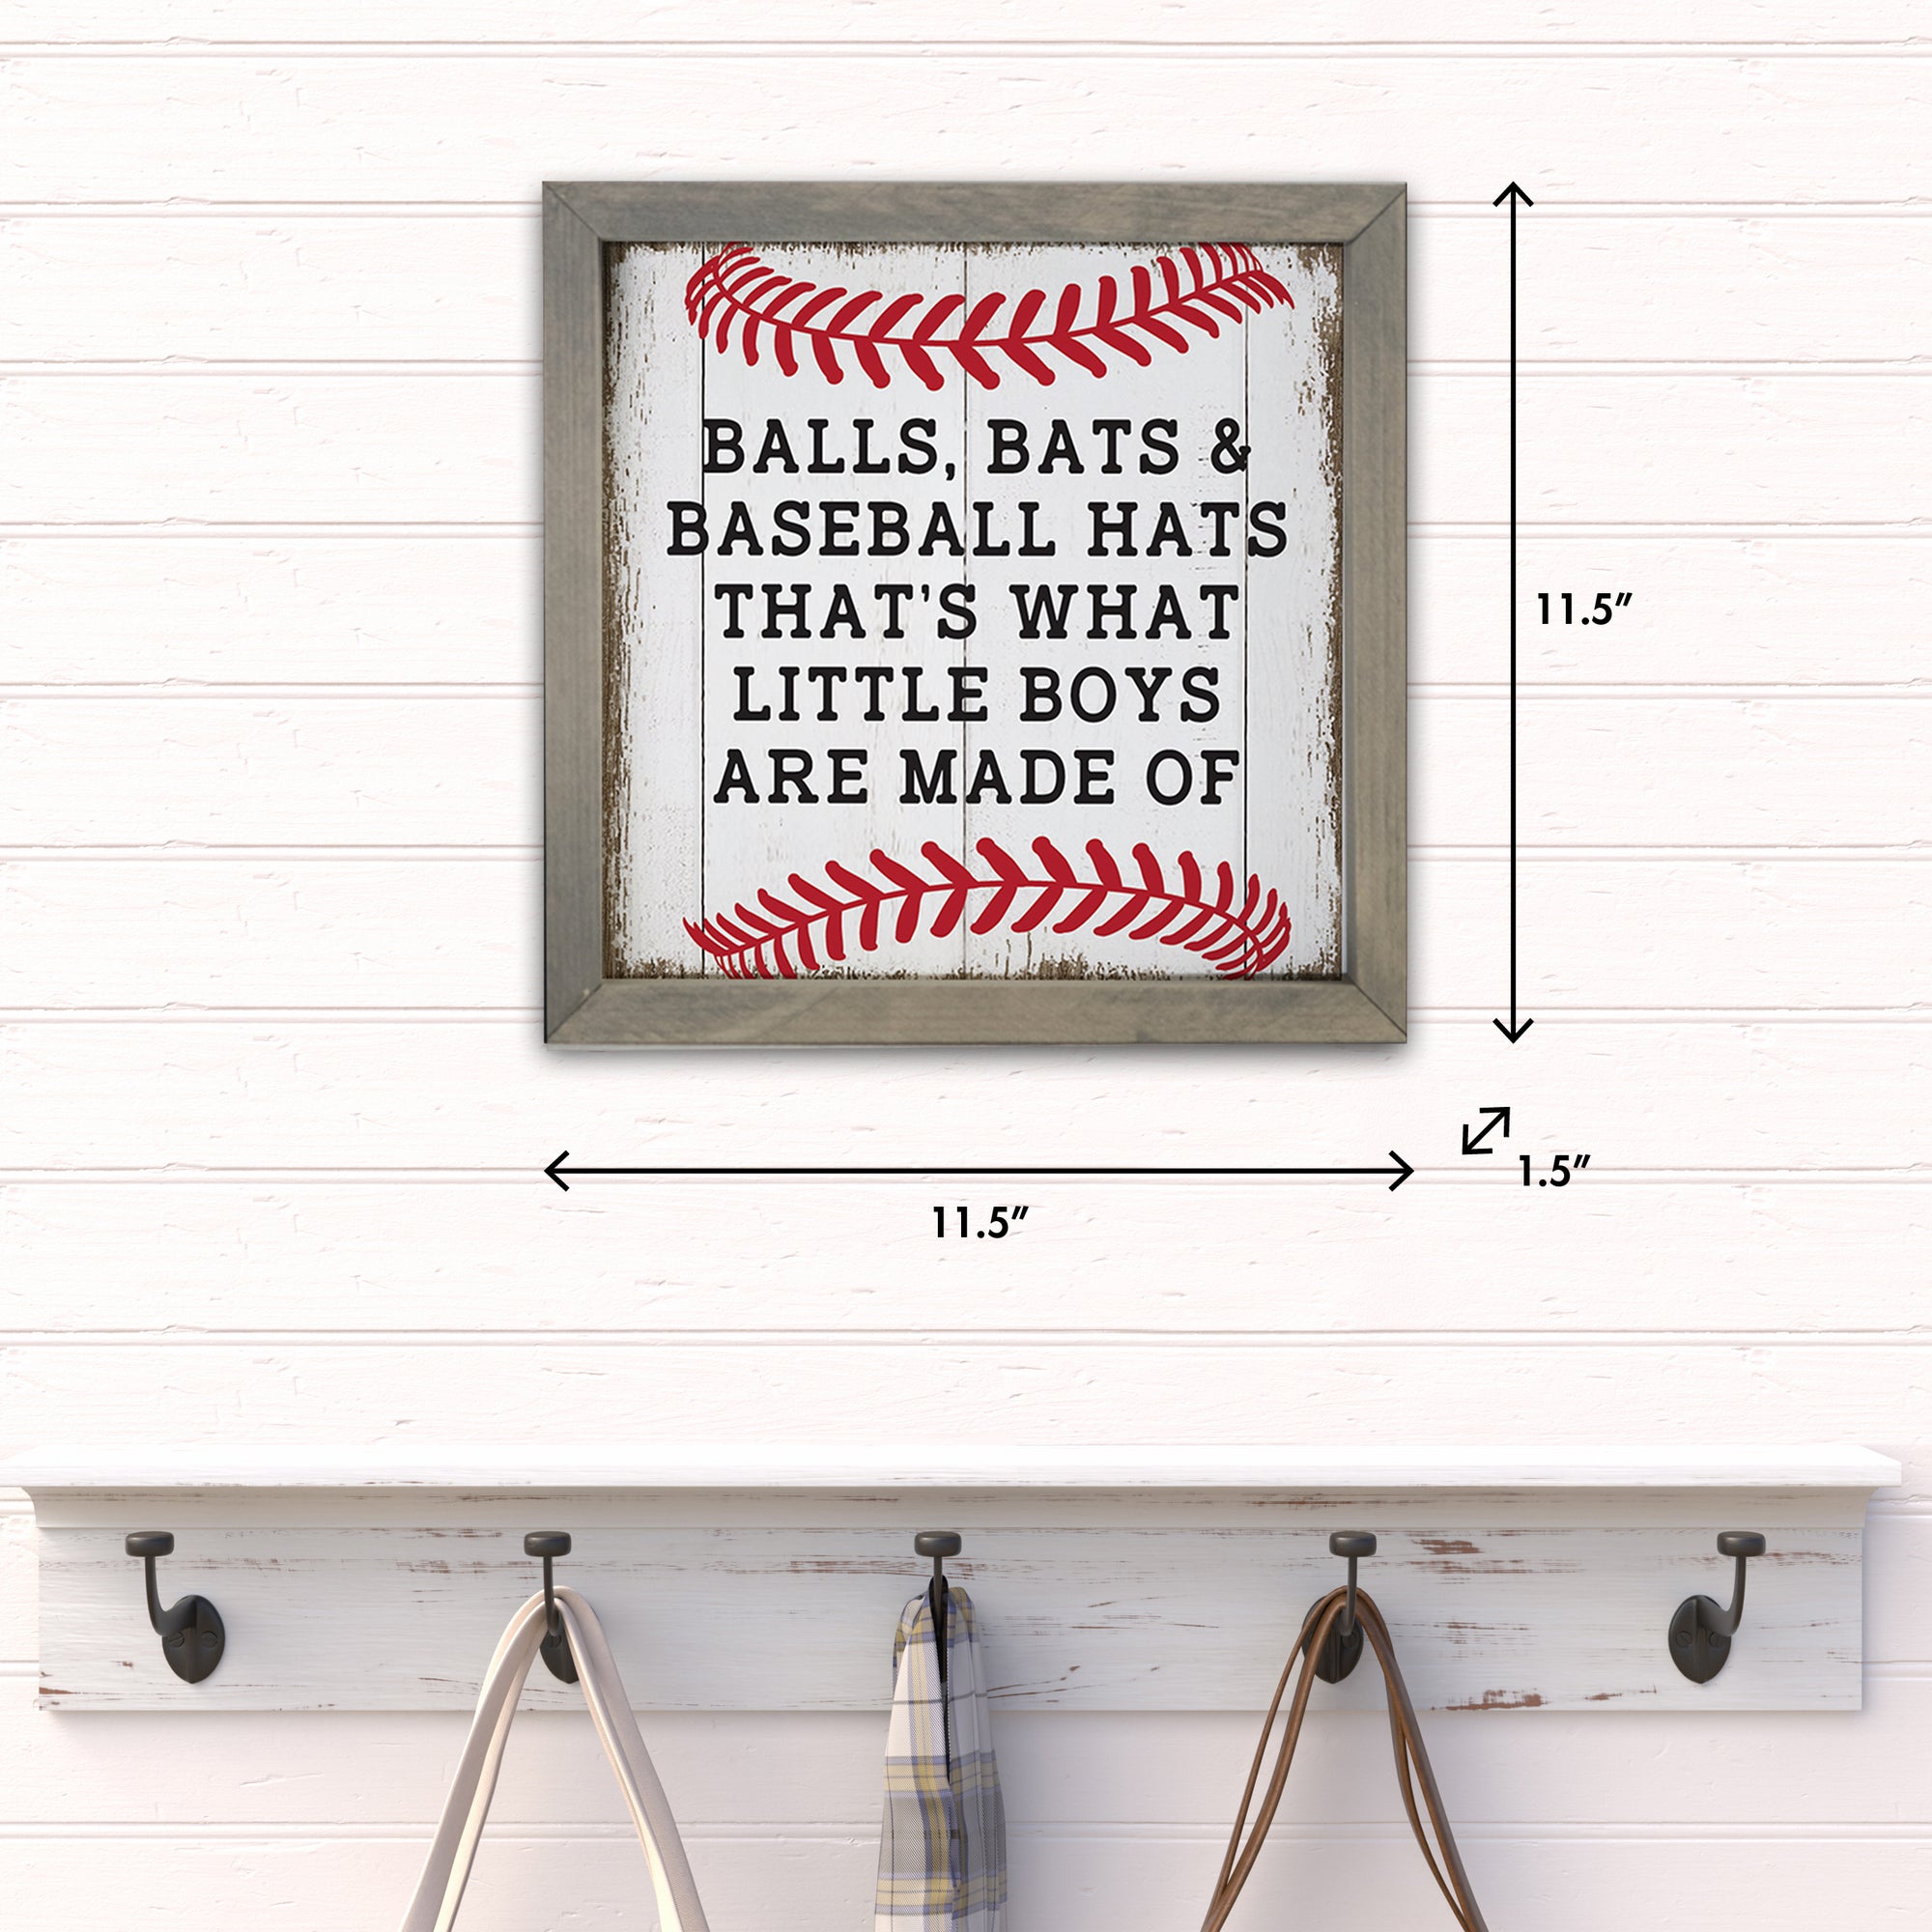 Elevate your living space with our elegant baseball framed shadow box shelf décor